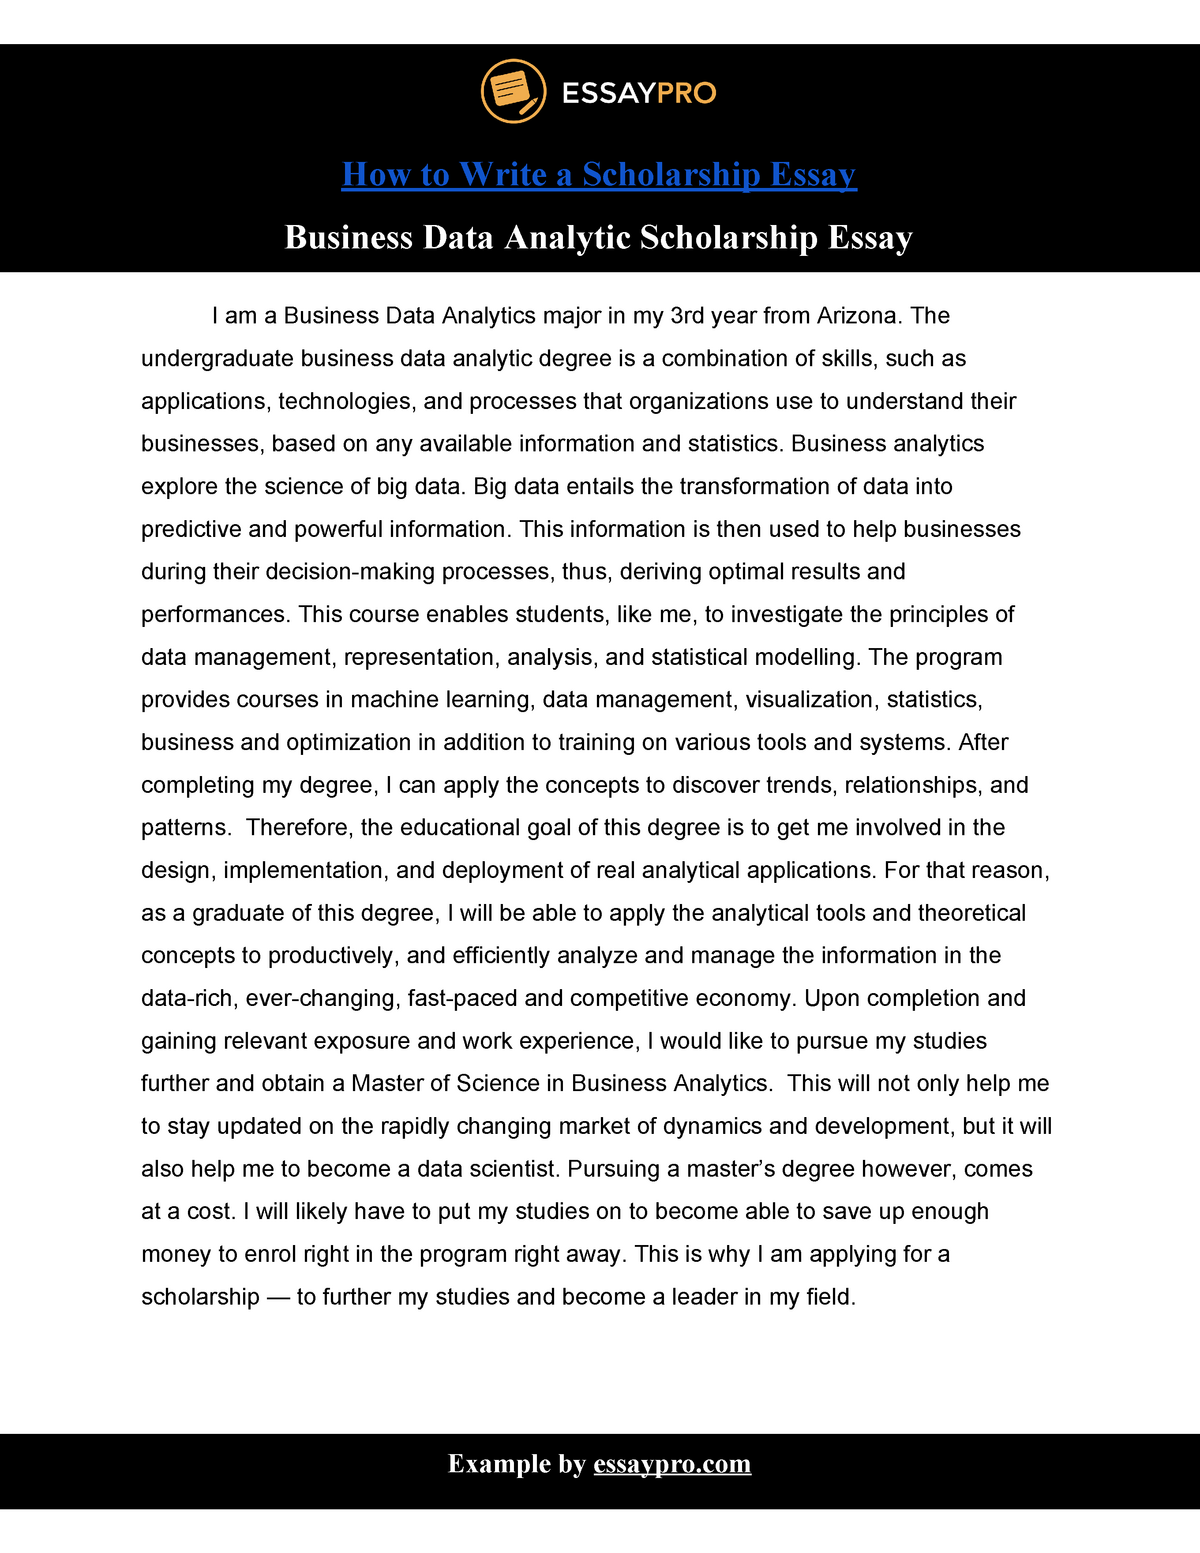 essay about business analytics